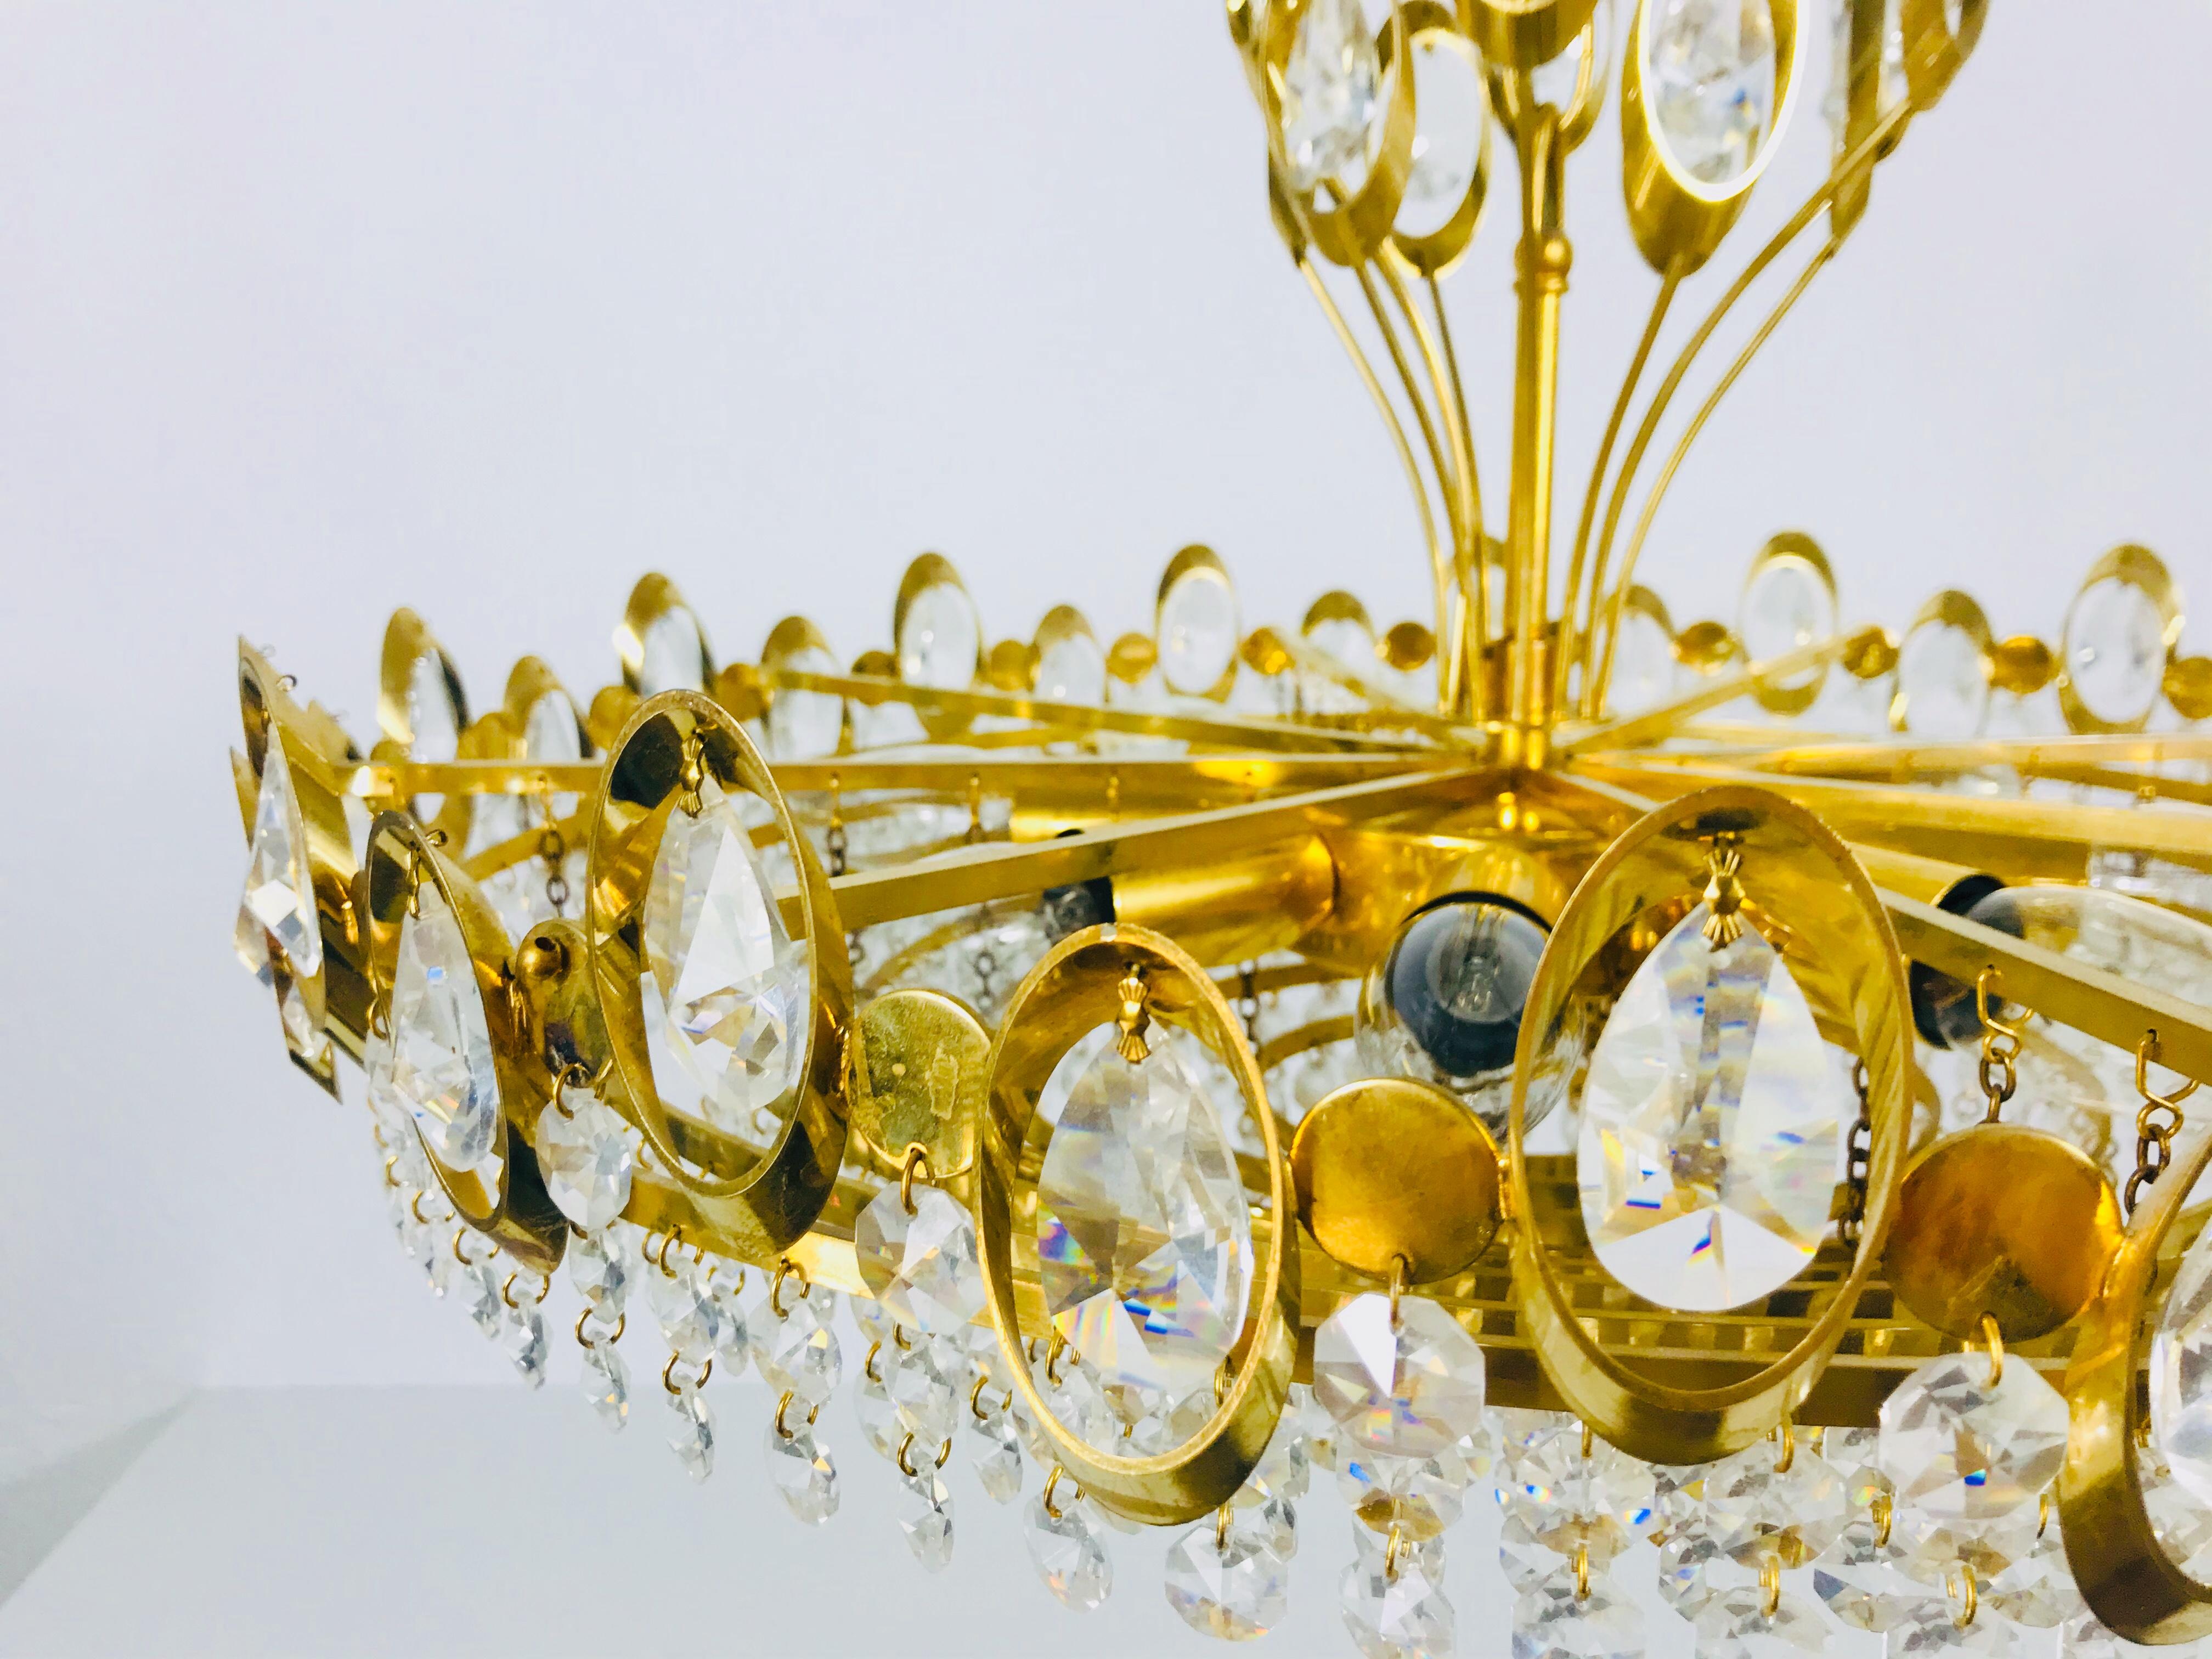 Golden Gilded Brass and Crystal Glass Chandelier by Palwa, Germany, 1960s For Sale 2